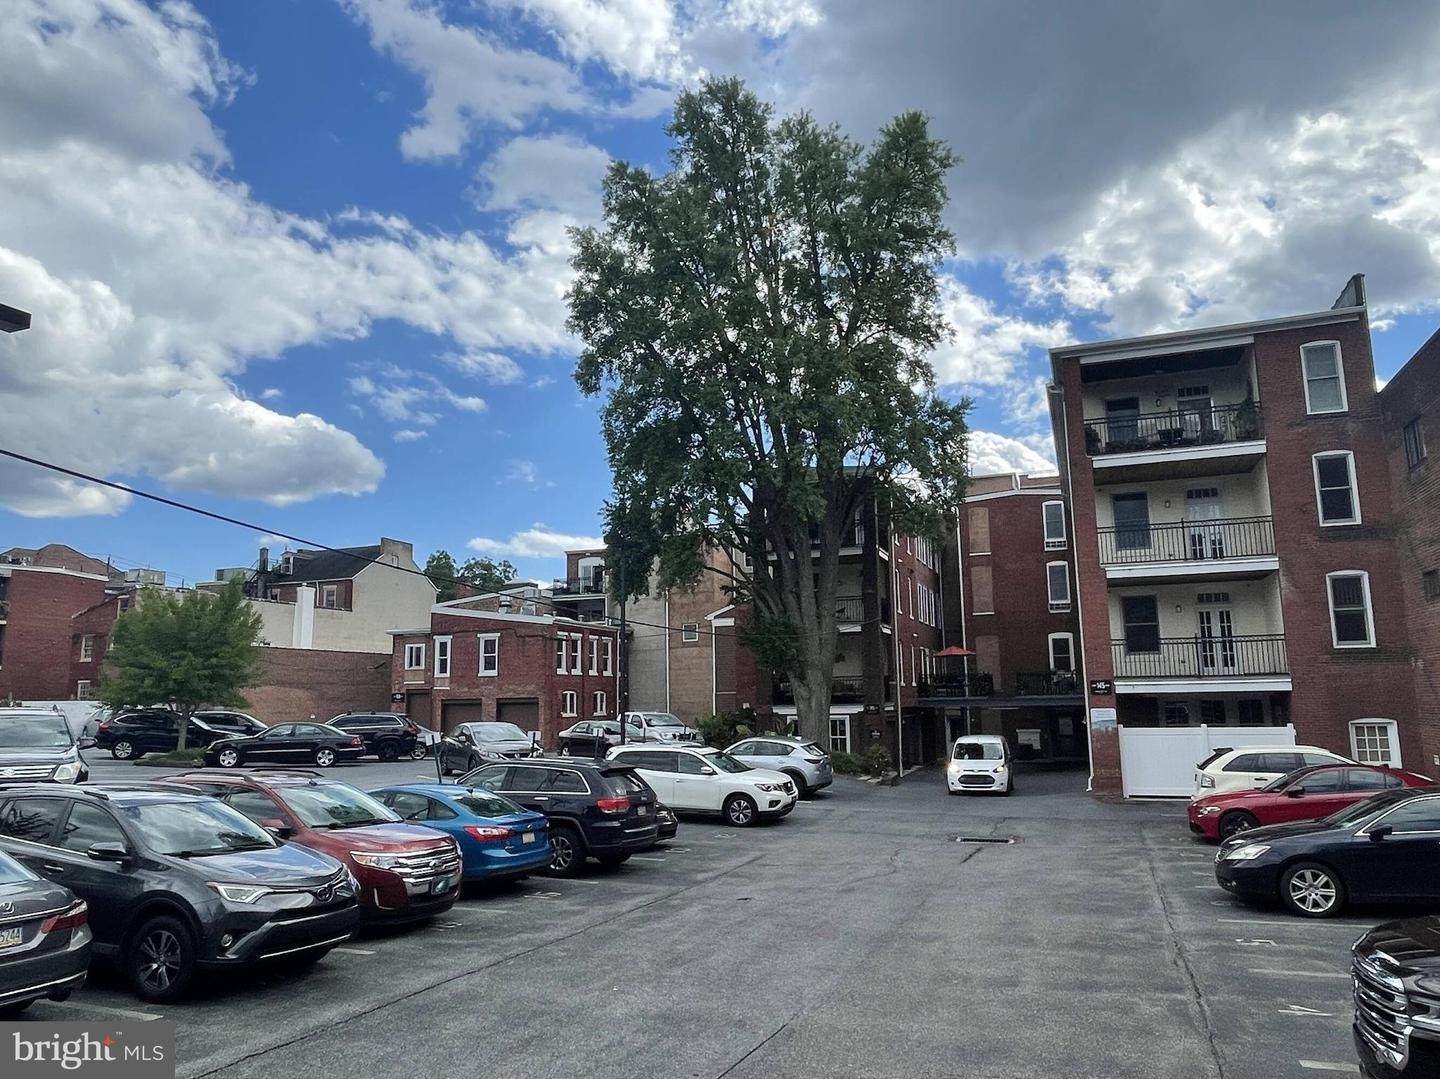 2. Commercial for Sale at 143-159 E KING #MULTIPLE Lancaster, Pennsylvania 17602 United States